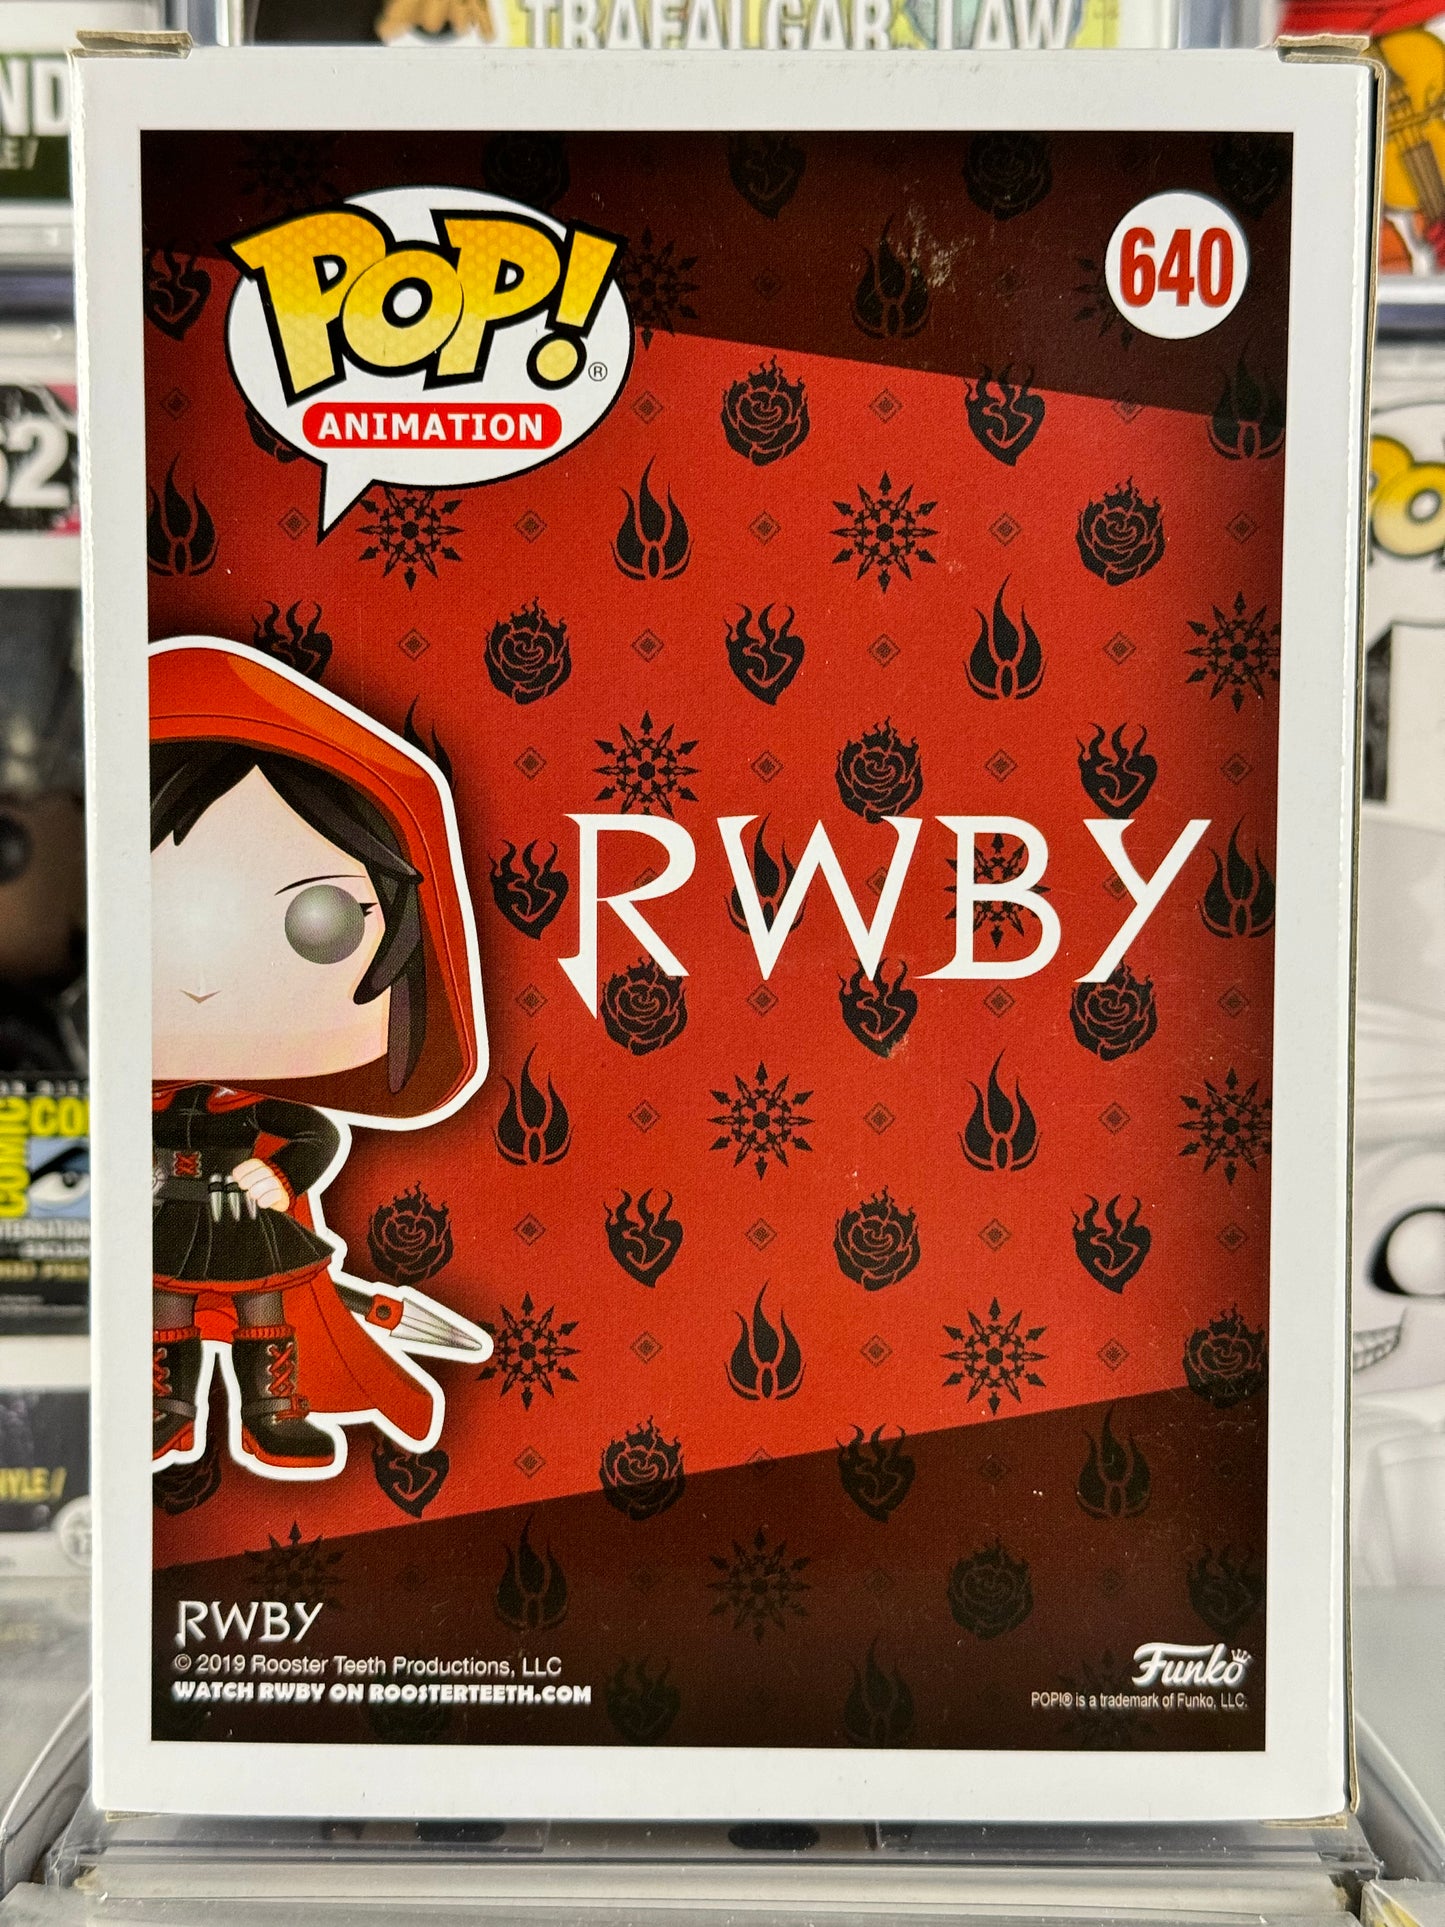 RWBY - Ruby Rose (Cape & Hood) (640) Vaulted 2019 Summer Convention Exclusive